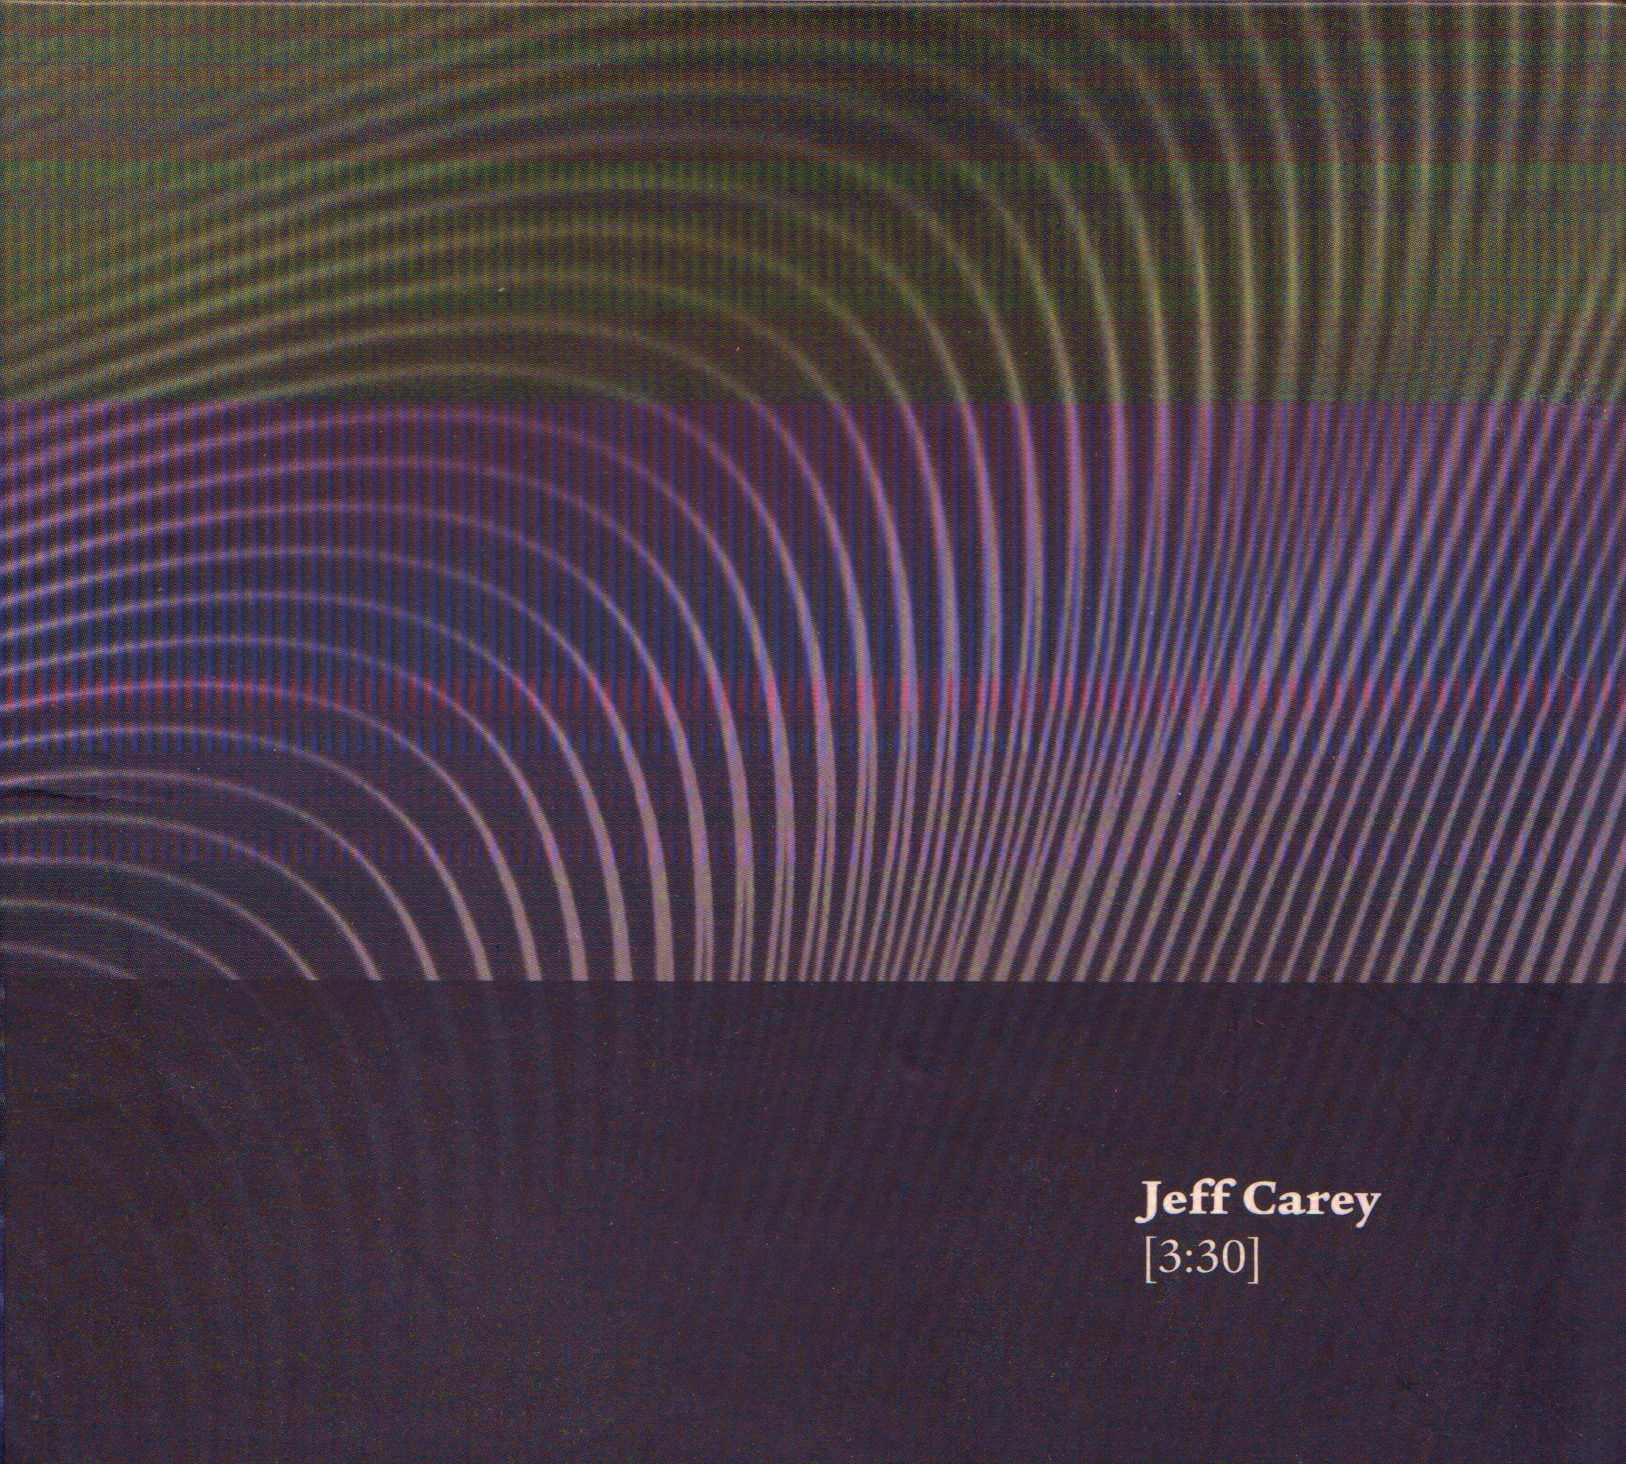 Cover art for the CD "[3:30]" by Jeff Carey.  2013, Forwind, London, UK